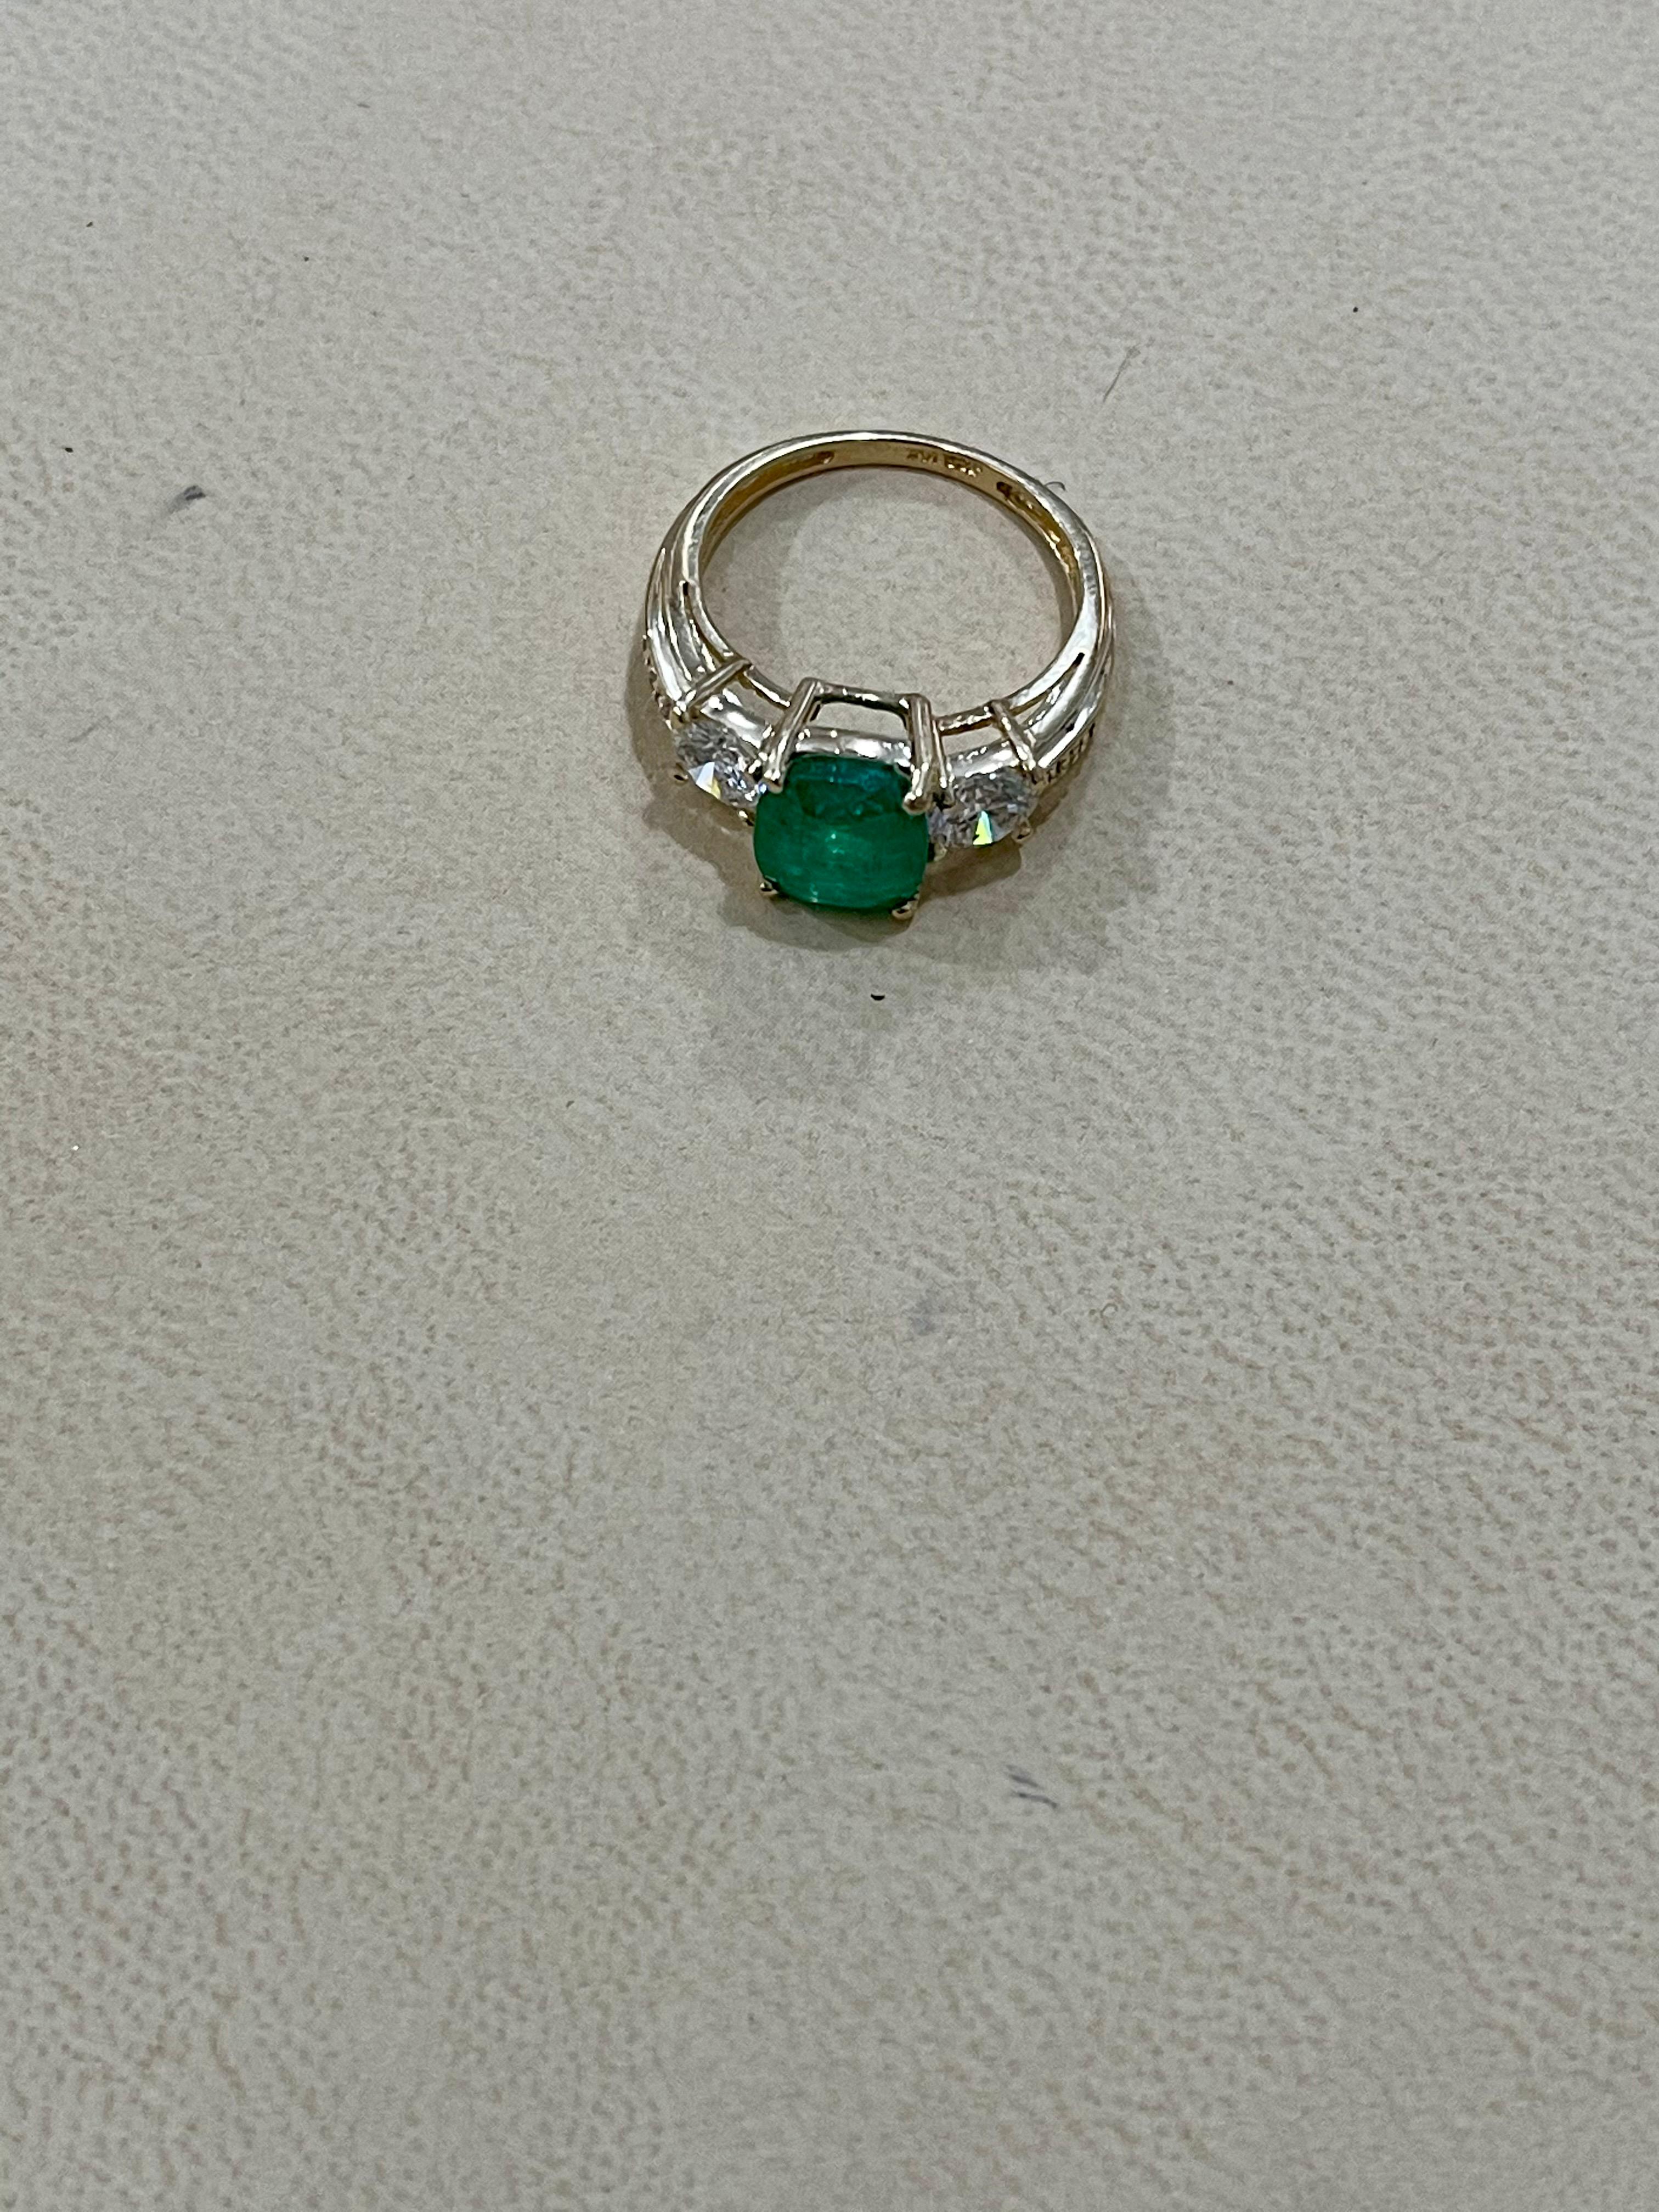 3 Carat Natural Cushion Cut Emerald & 2 Solitaire Diamond Ring 14 Kt Yellow Gold For Sale 3